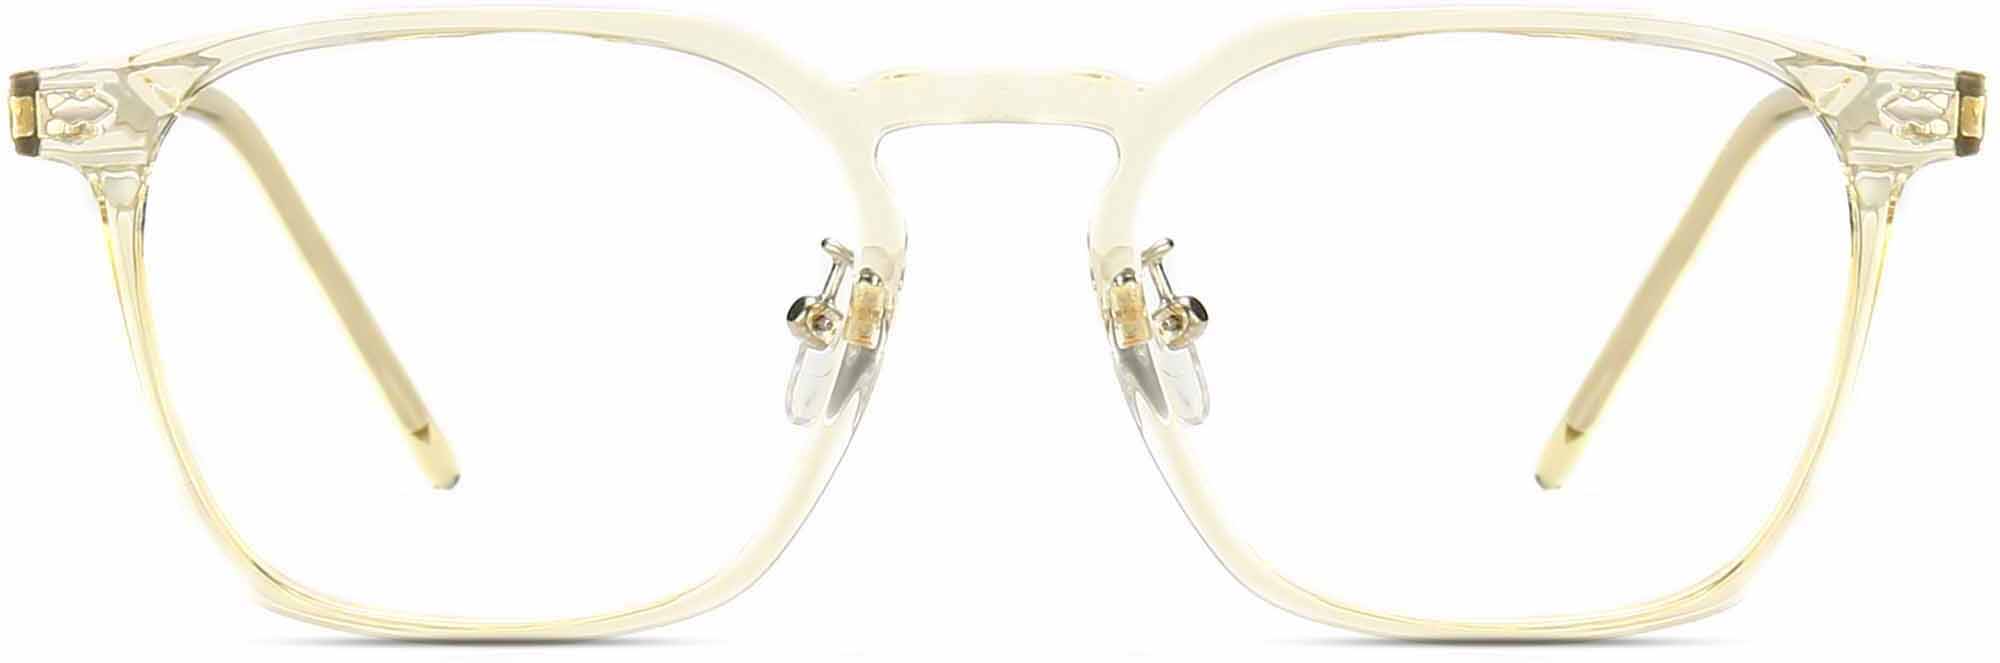 Biblio Square Clear Eyeglasses from ANRRI, front view